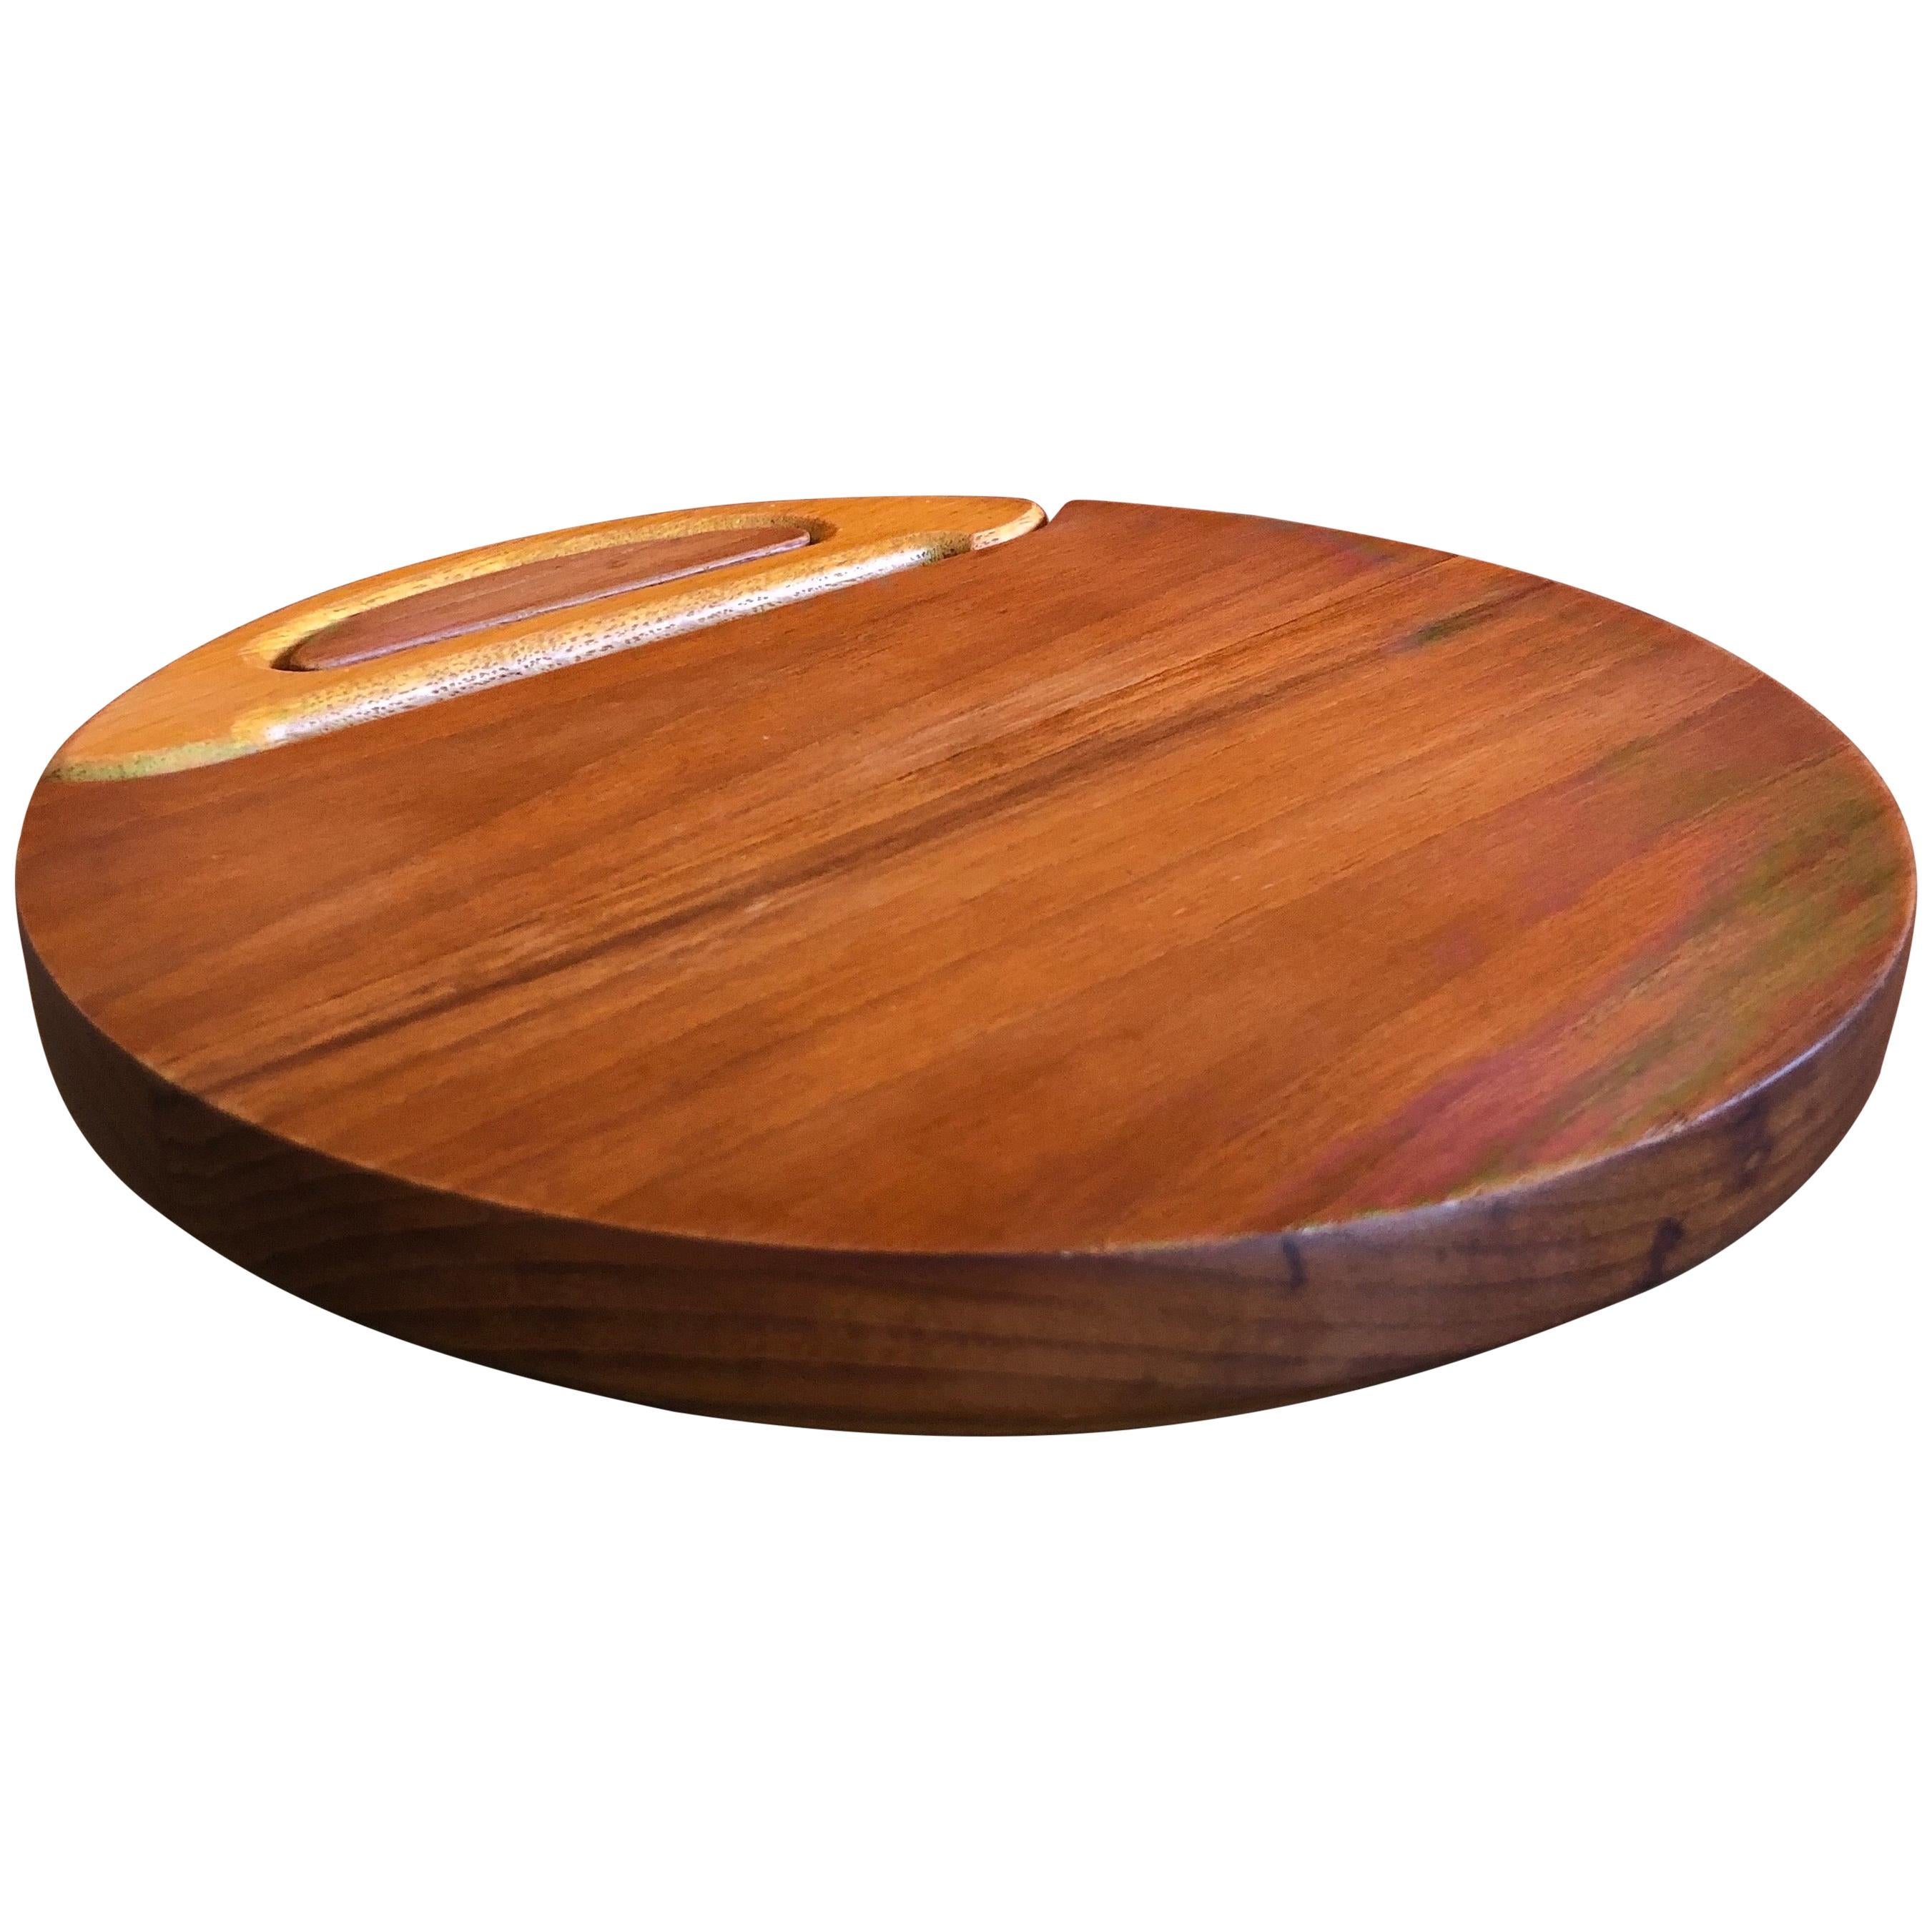 Staved Teak Cheese Board with Cutter by Jens Quistgaard for Dansk